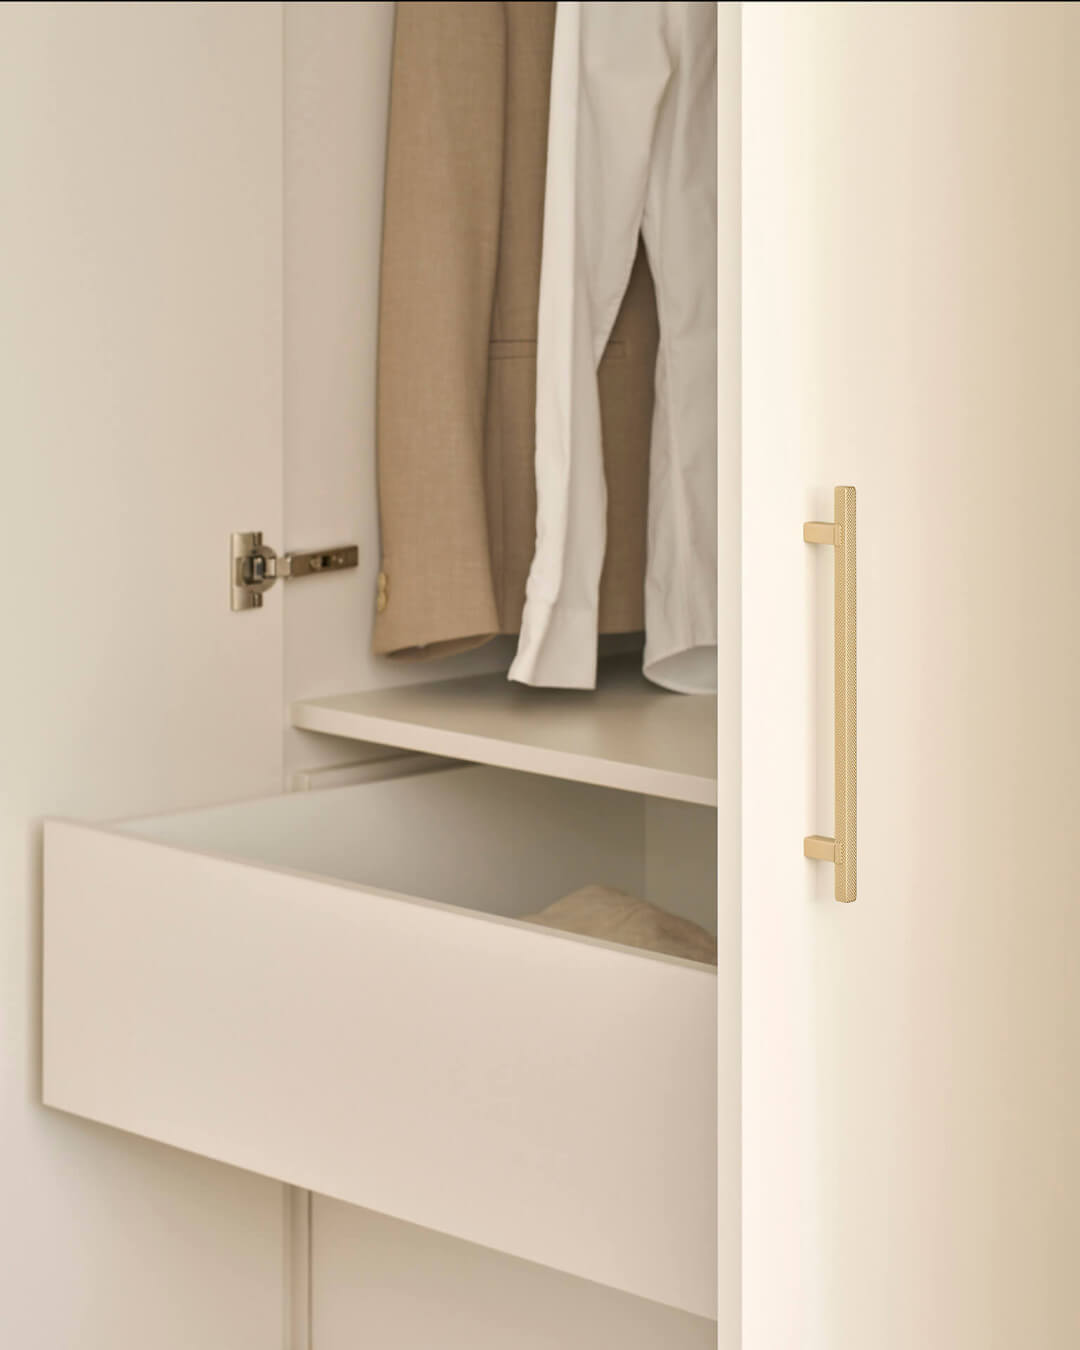 Wardrobe in Seashell colour with Diamond handles in brass